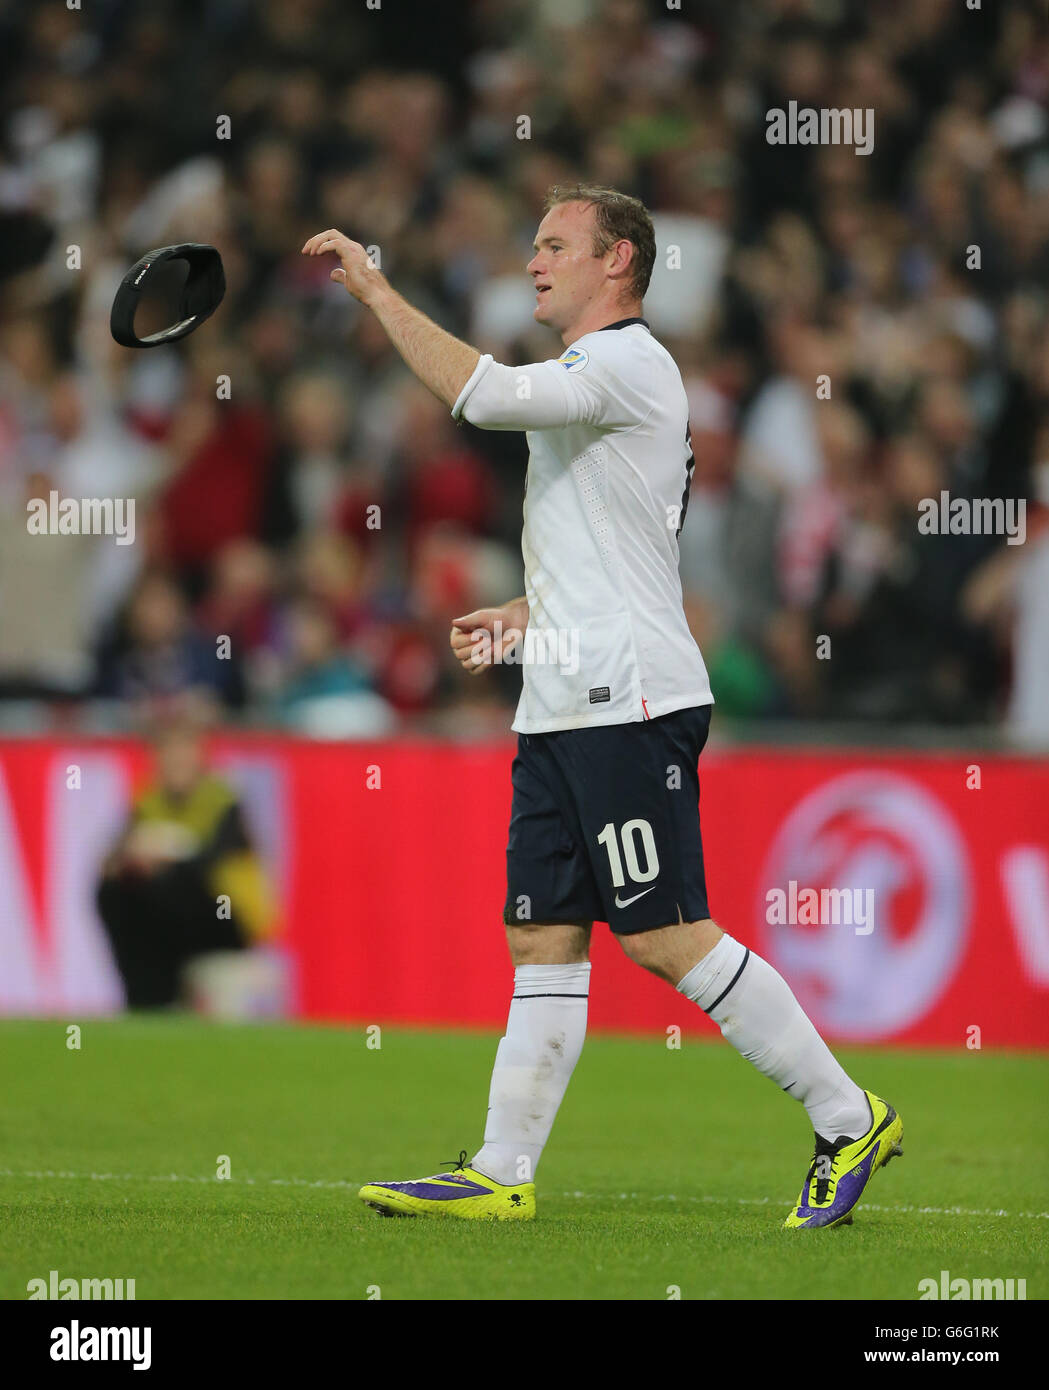 England's Wayne Rooney throws his headband following their victory over Poland in the FIFA 2014 World Cup Qualifying, Group H match at Wembley Stadium, London. PRESS ASSOCIATION Photo. Picture date: Tuesday October 15, 2013. England have qualified for next year's World Cup in Brazil after winning their final qualifying Group H match against Poland 2-0. See PA story SOCCER England. Photo credit should read: Nick Potts/PA Wire. RESTRICTIONS: Use subject to FA restrictions. Editorial use only. Commercial use only with prior written consent of the FA. No editing except cropping. Call +44 (0)1158 Stock Photo